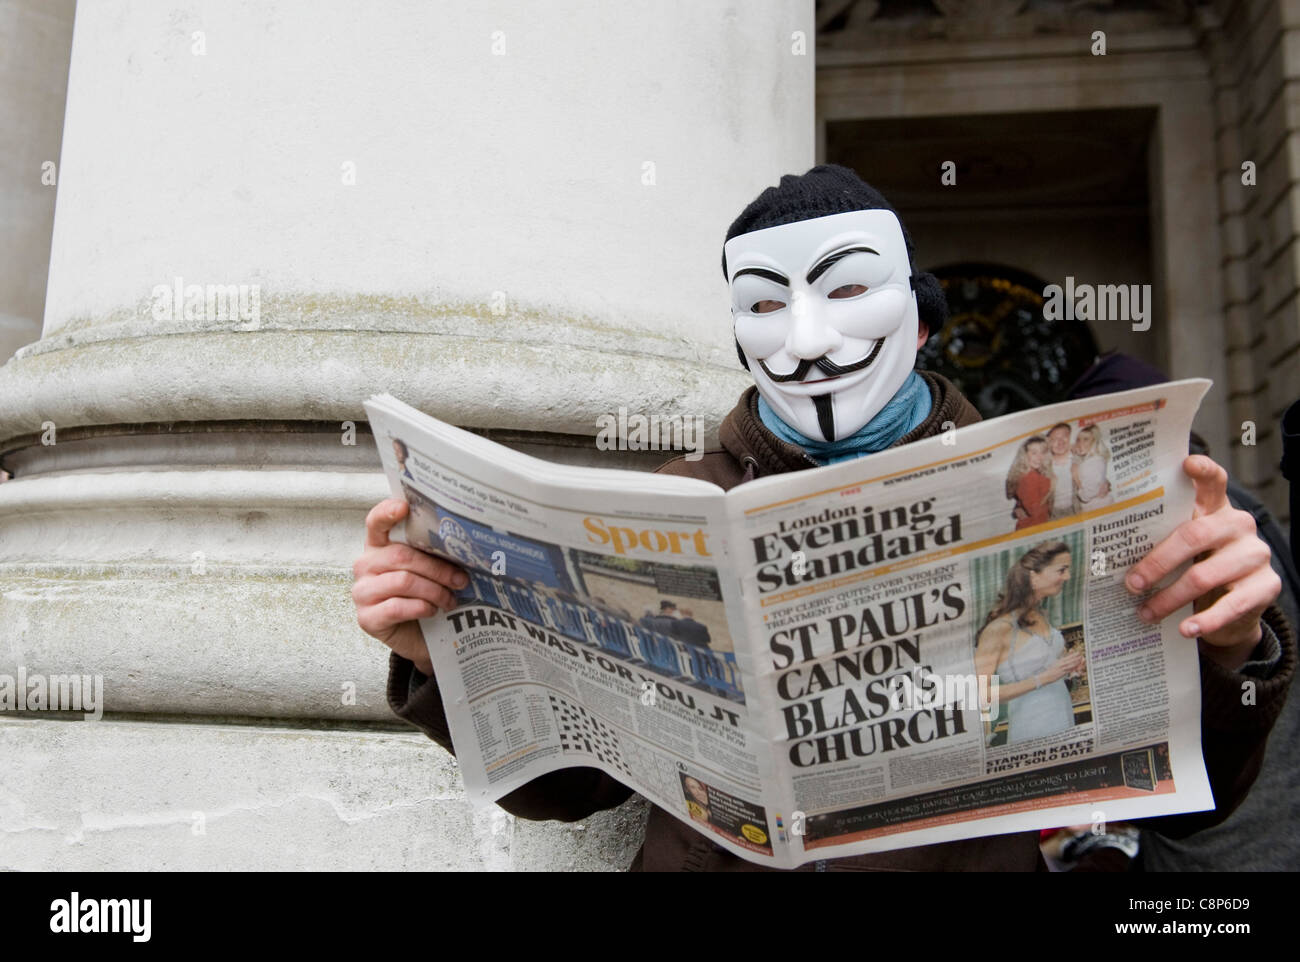 Occupy the Stock Exchange protest outside Royal Exchange, London. Some protestors have adopted the V for Vendetta mask. Stock Photo